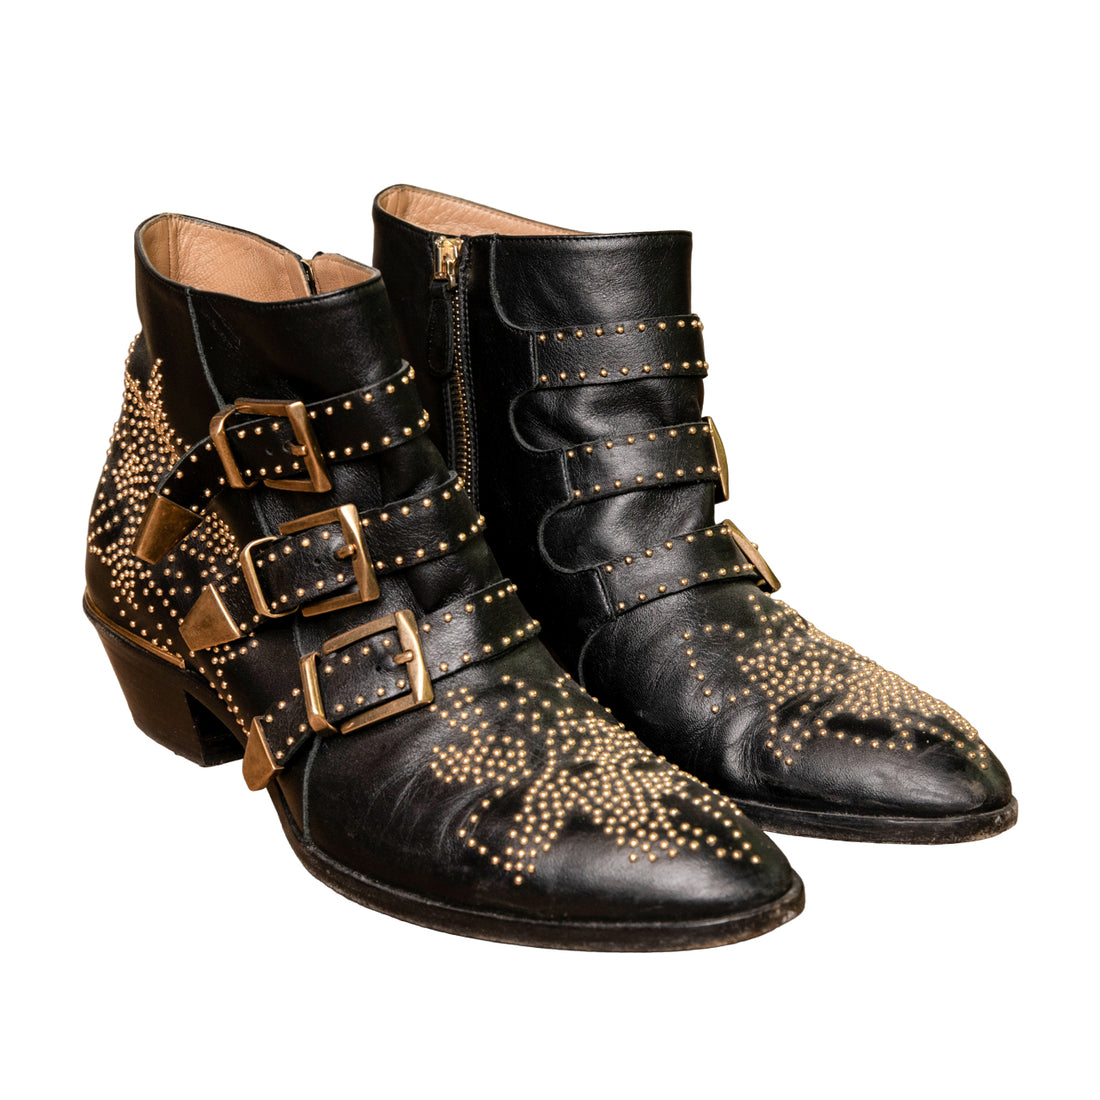 Chloe Suzanna ankle boots with studs